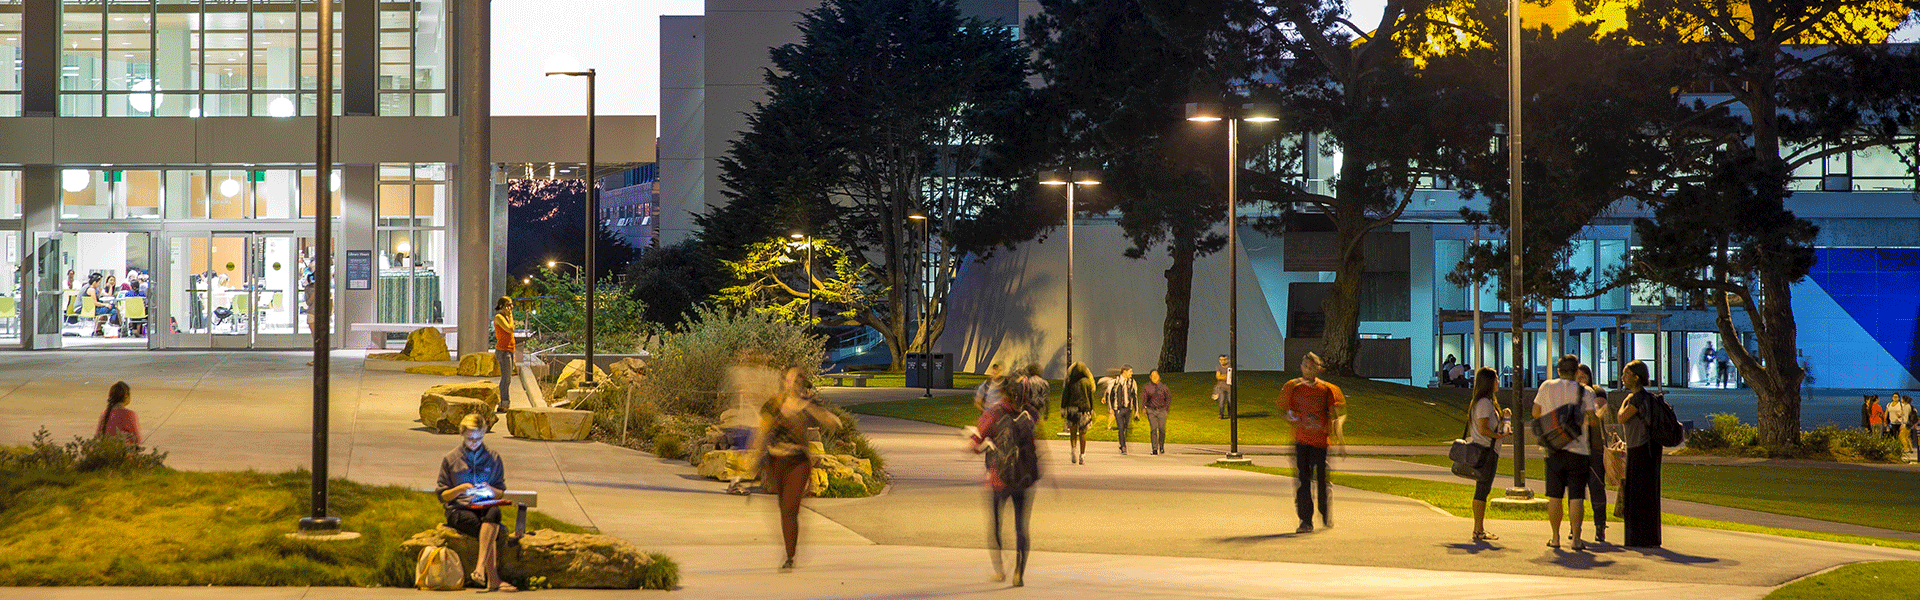 Students walking on campus at night